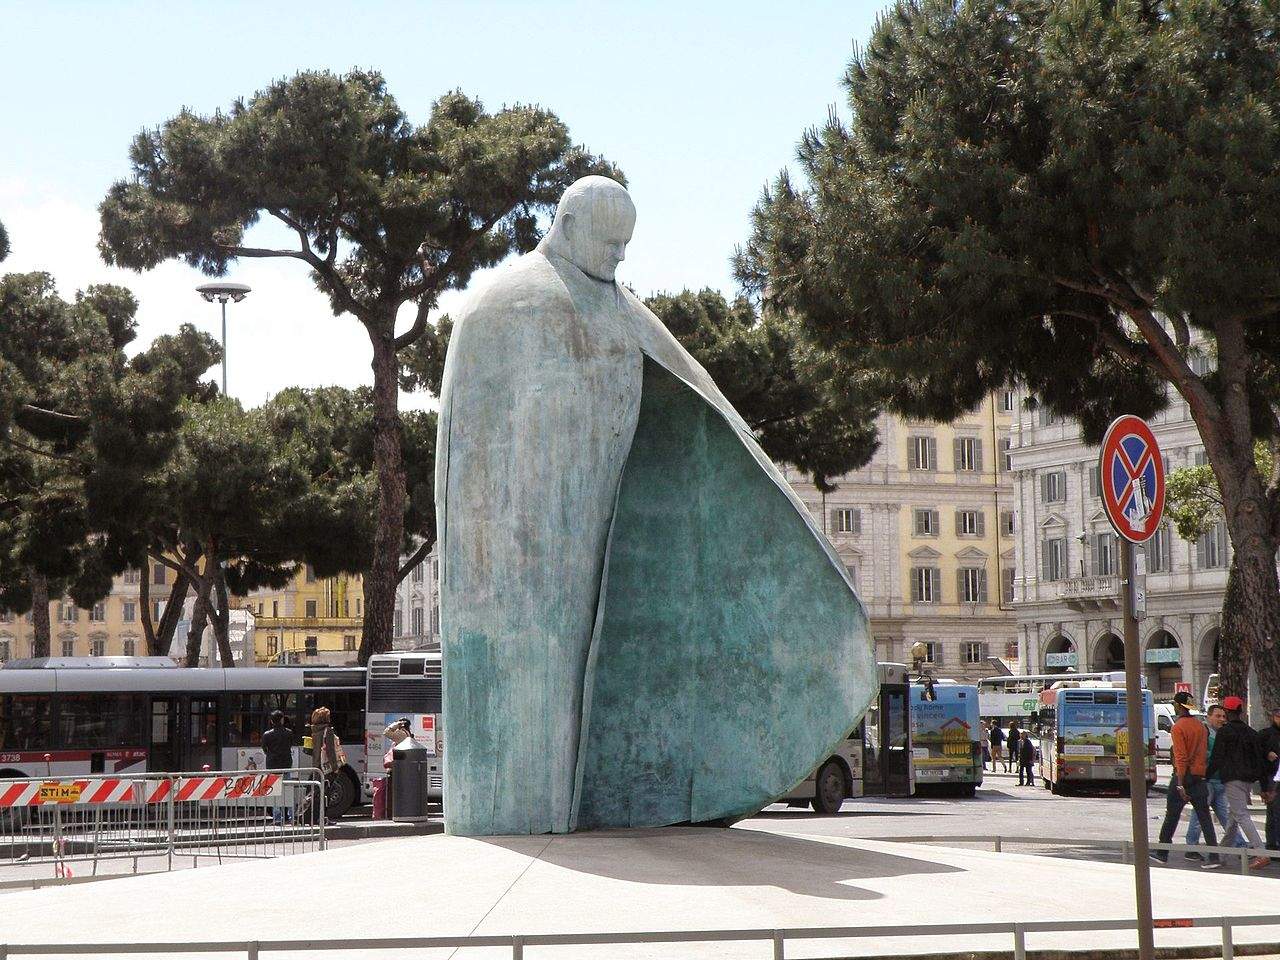 Speaking of monuments to be torn down: here are 20 of Italy's ugliest statues. What should we do with them?